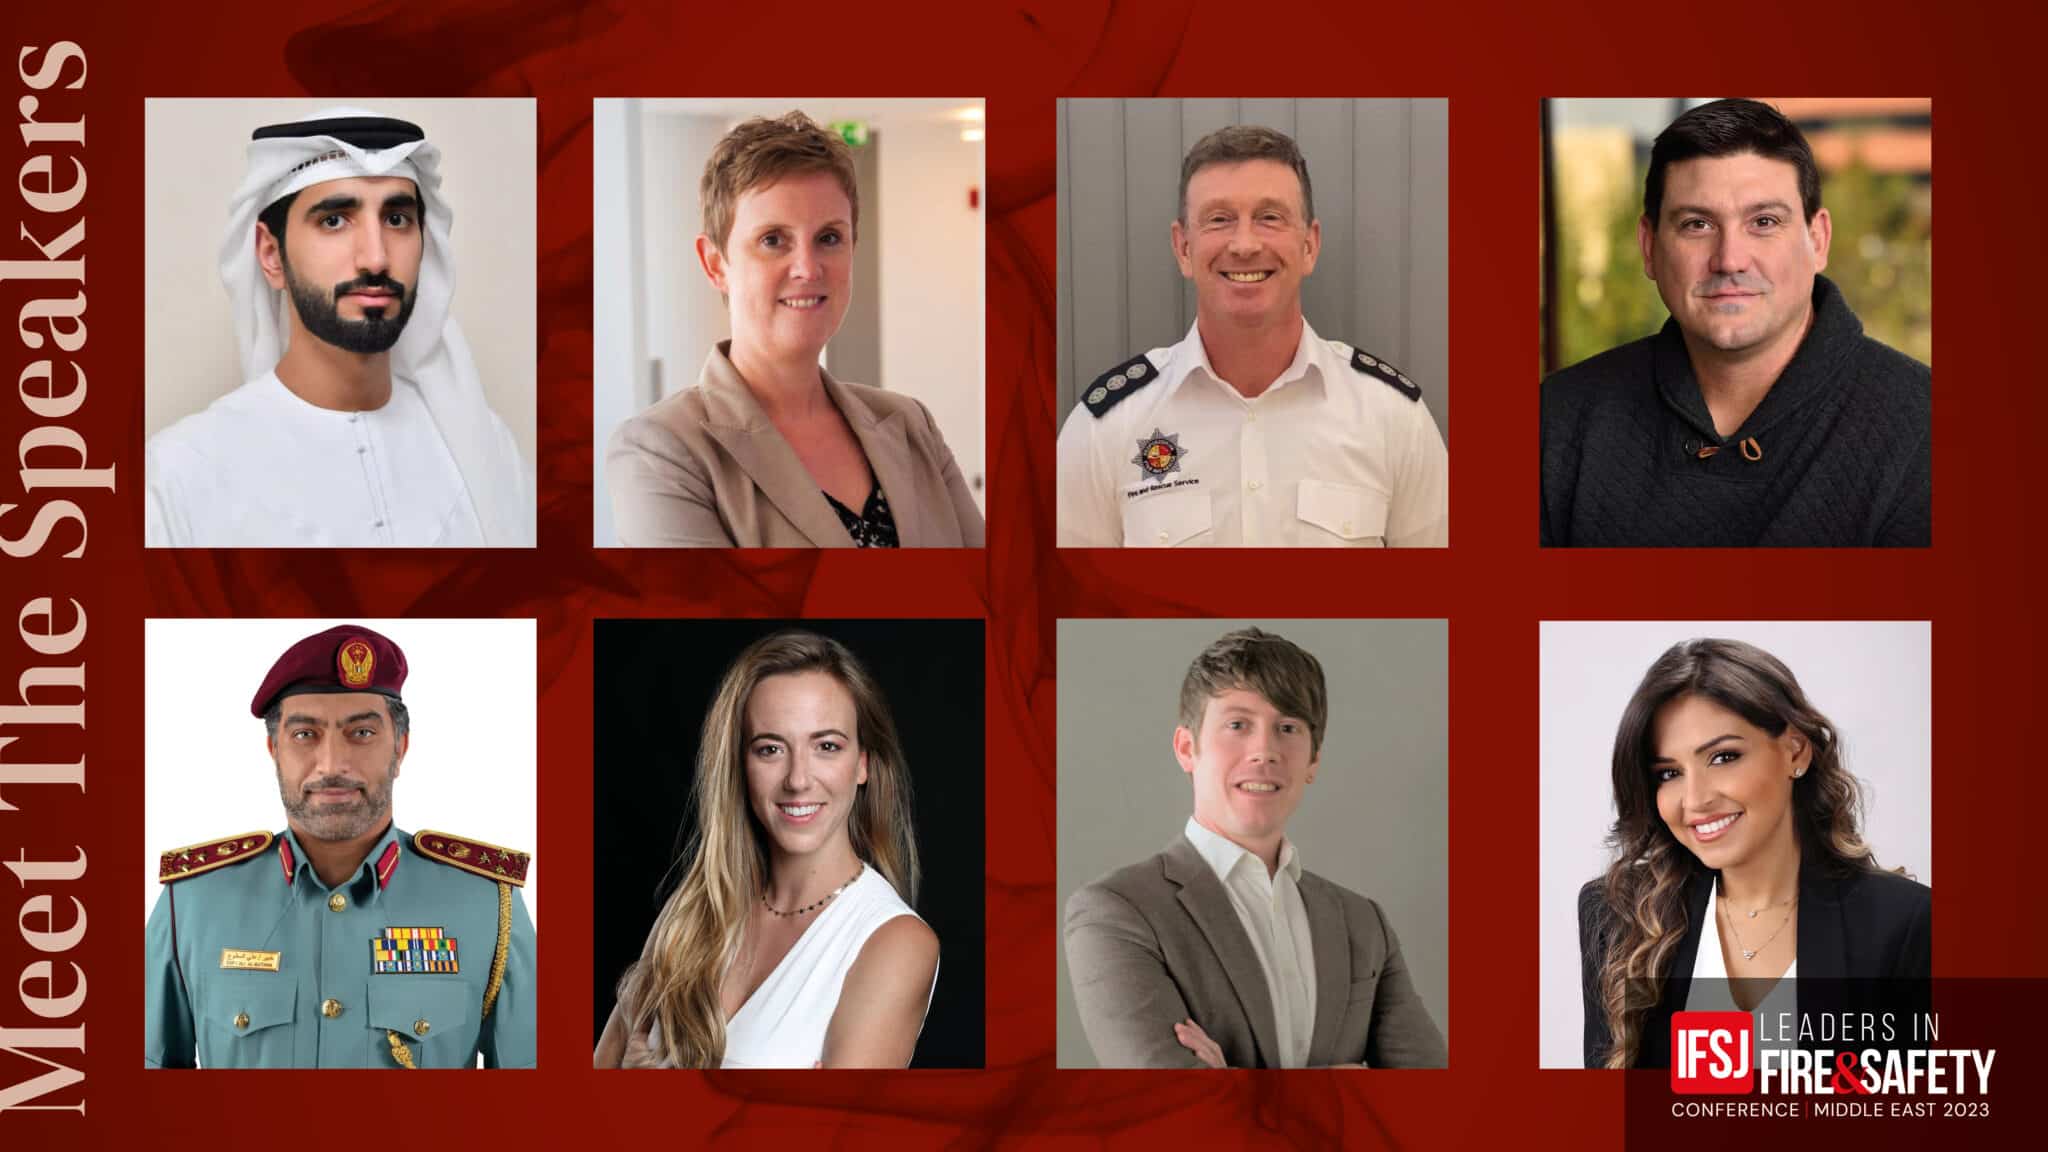 IFSJ Leaders in Fire & Safety Conference: Meet the Speakers